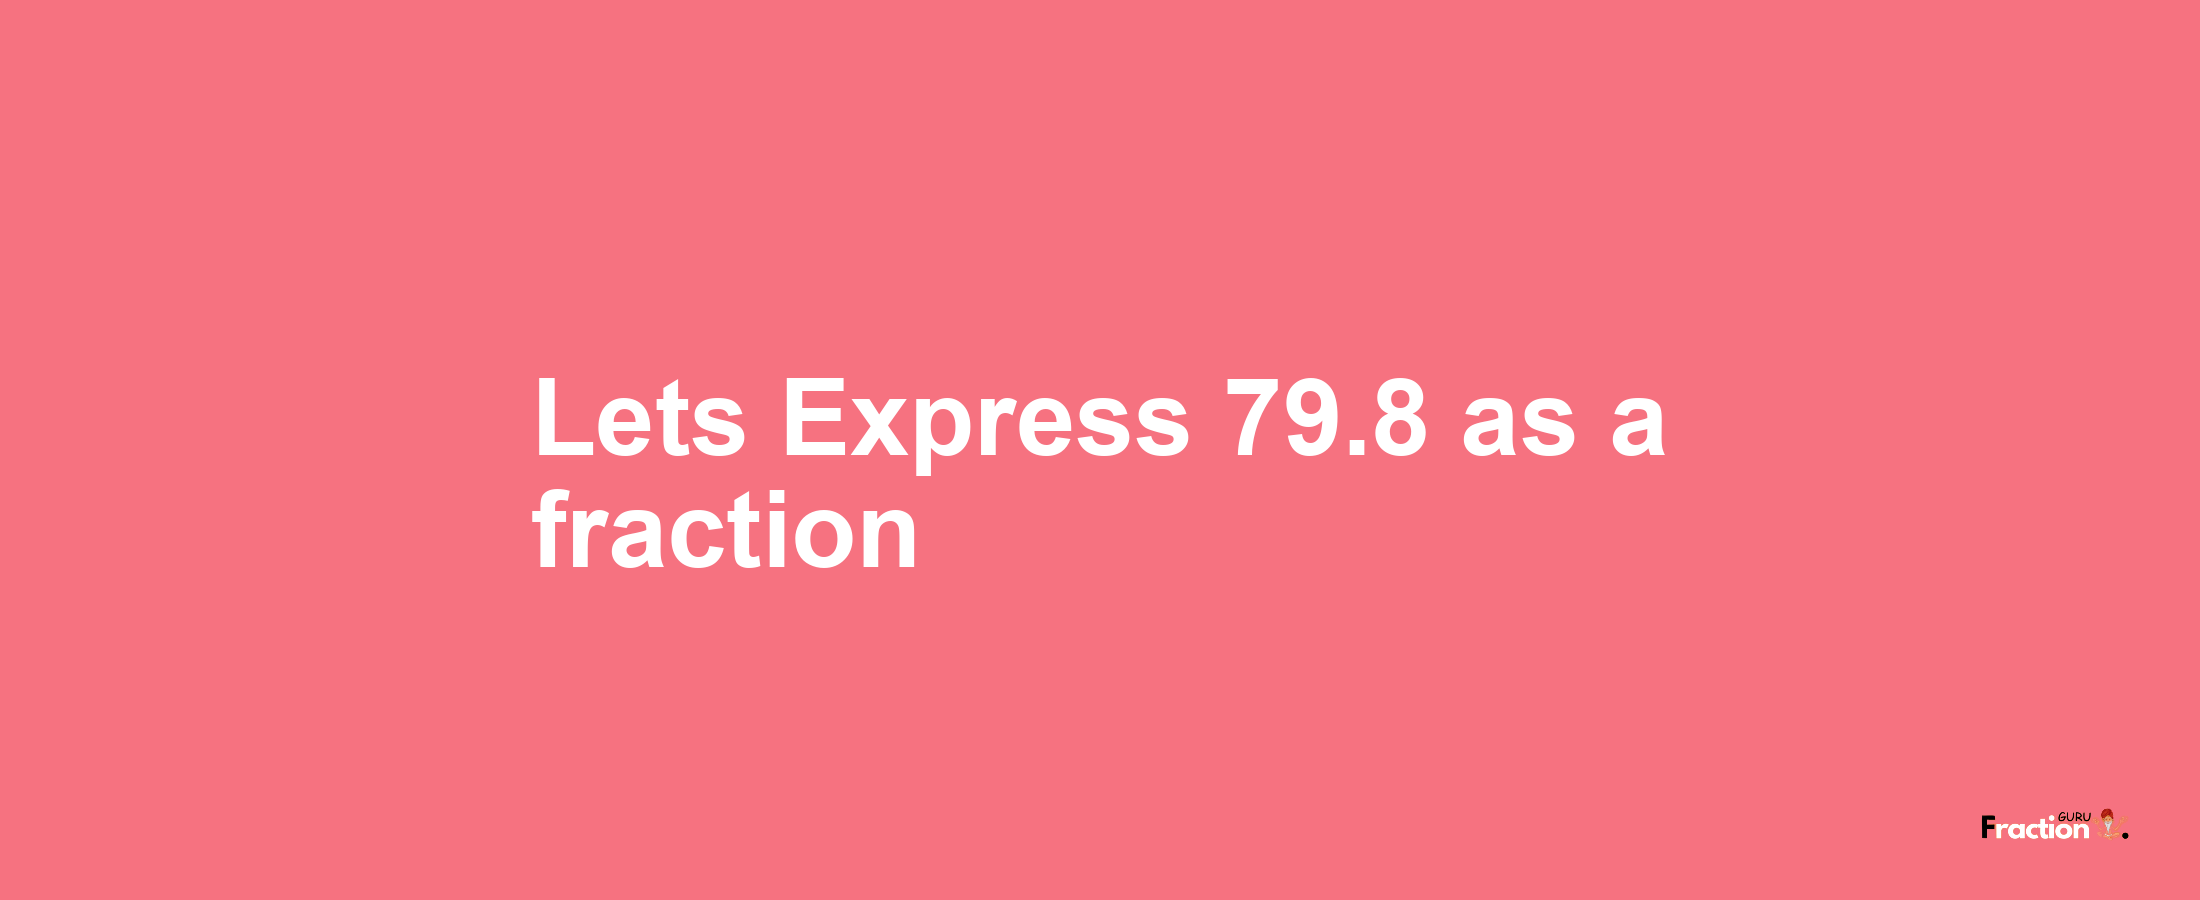 Lets Express 79.8 as afraction